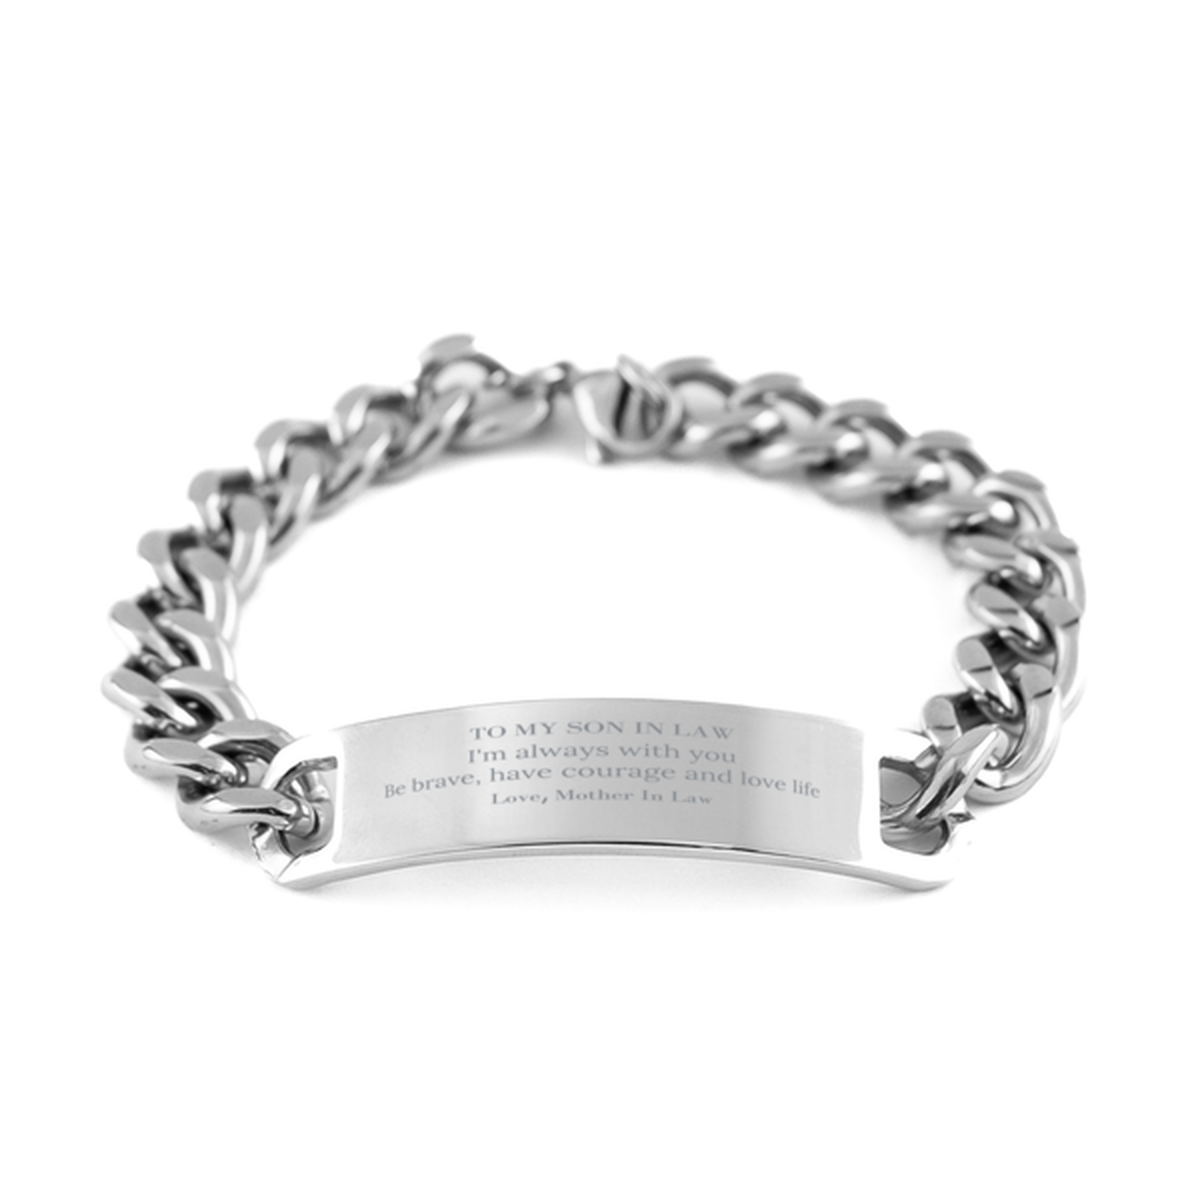 To My Son In Law Gifts from Mother In Law, Unique Cuban Chain Stainless Steel Bracelet Inspirational Christmas Birthday Graduation Gifts for Son In Law I'm always with you. Be brave, have courage and love life. Love, Mother In Law